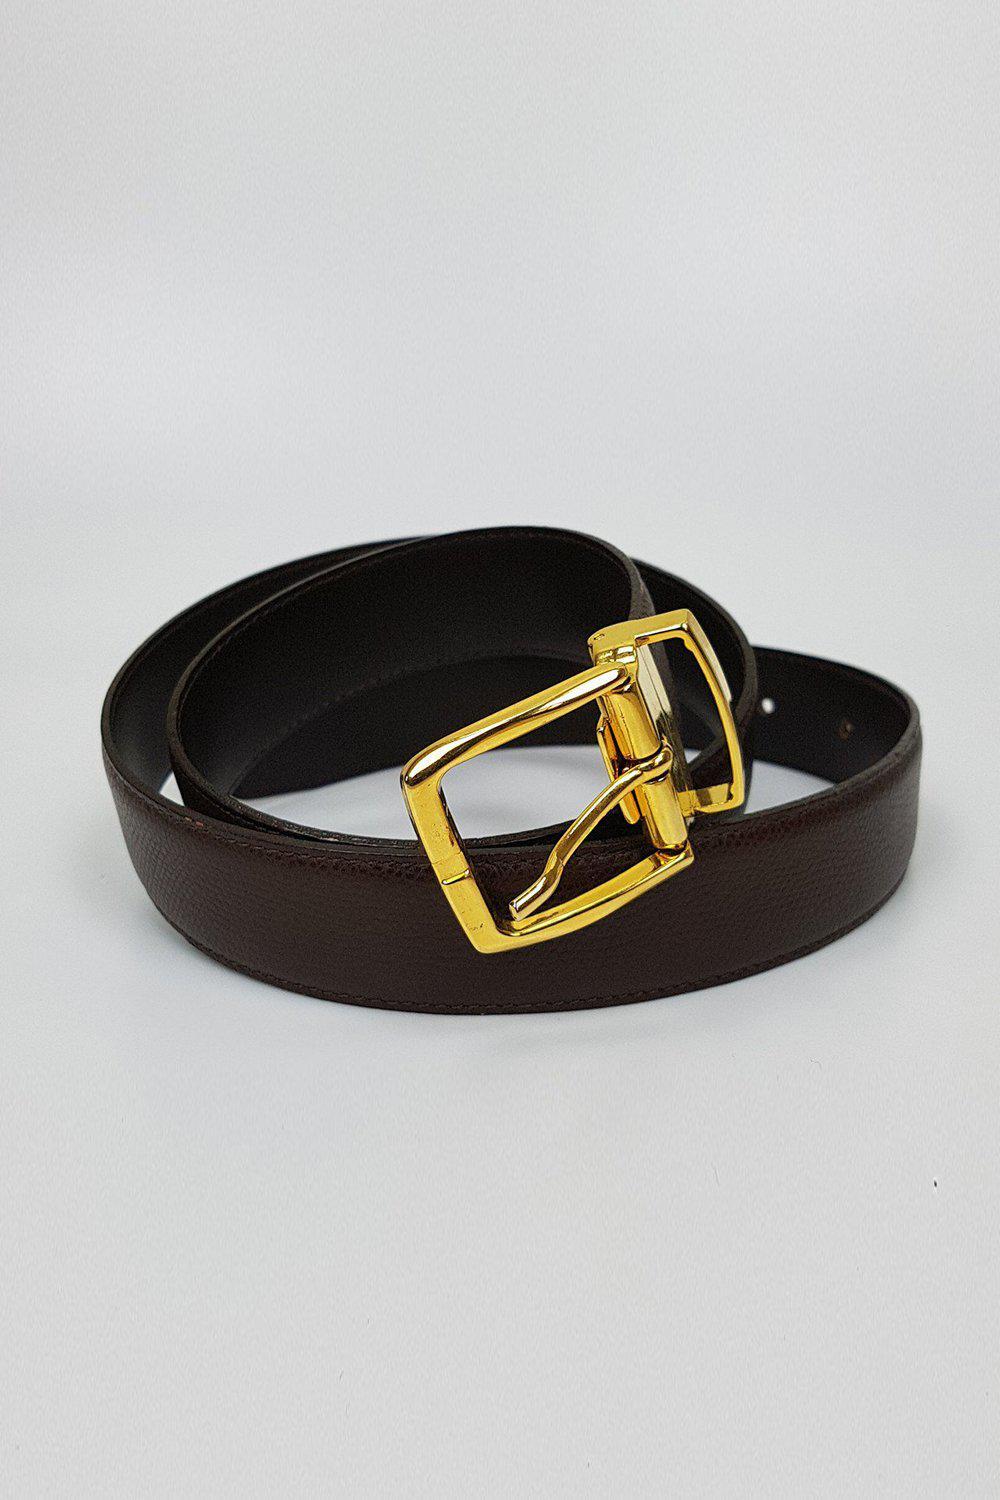 ARTBAG Brown Leather Textured Belt Gold Tone Buckle 103cm-Artbag-The Freperie